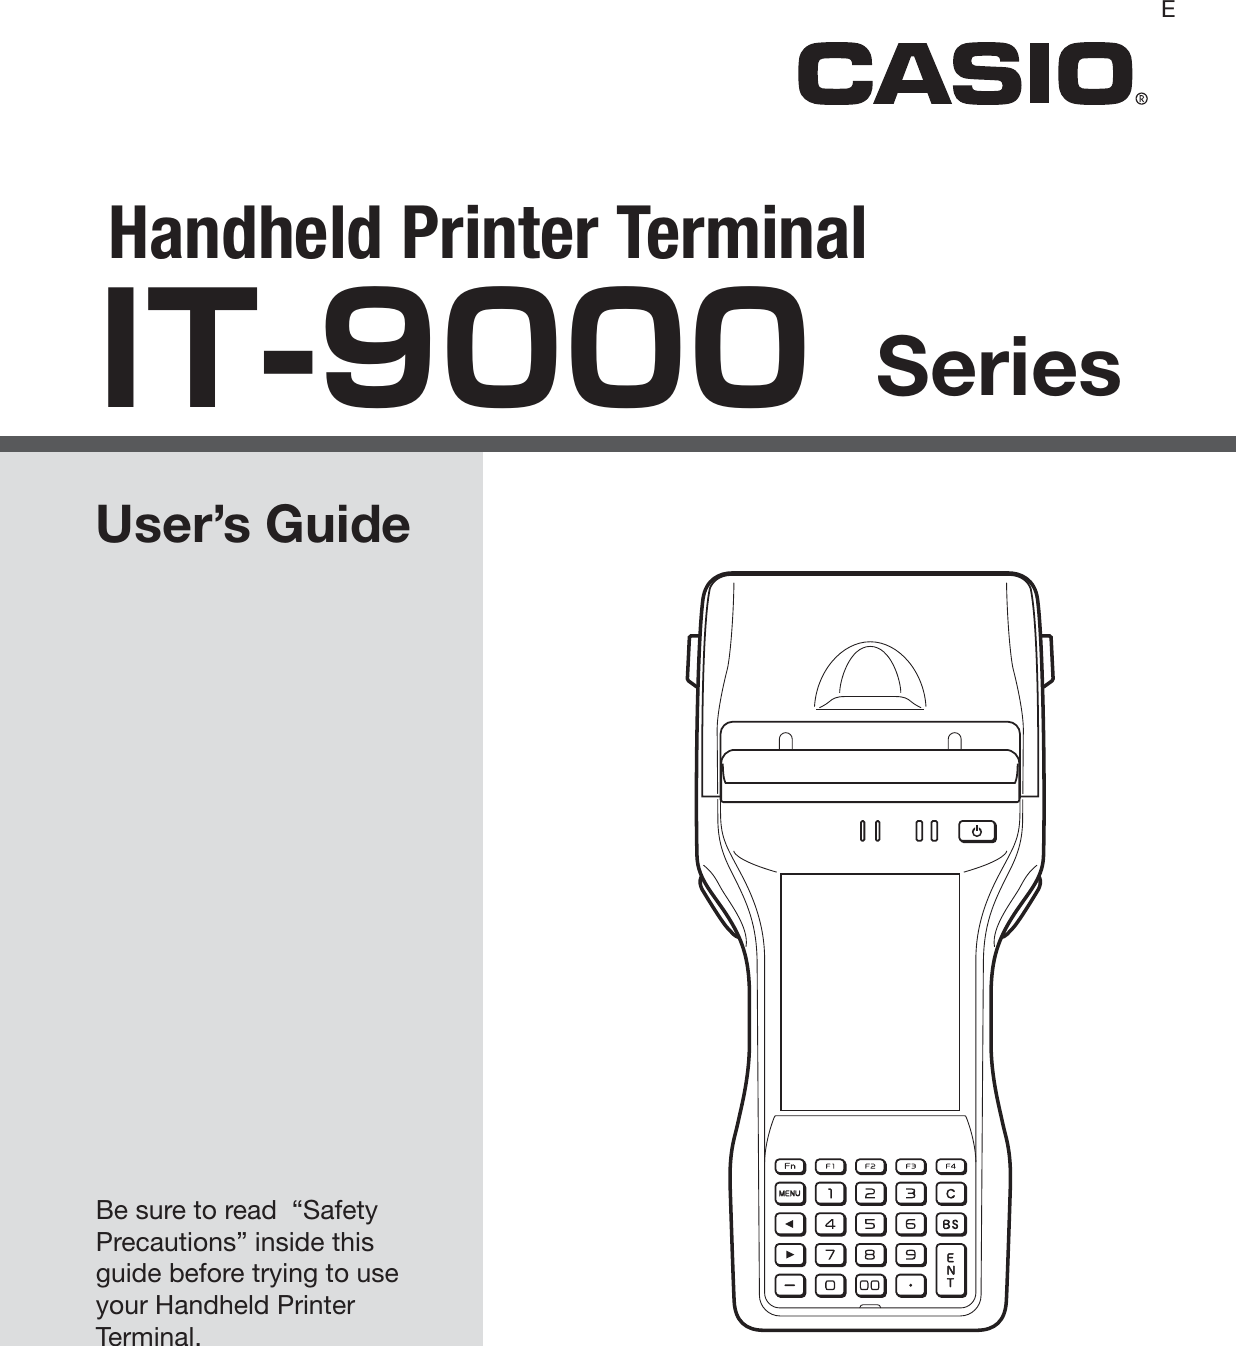 Handheld Printer TerminalUser’s GuideBe sure to read  “Safety Precautions” inside this guide before trying to use your Handheld Printer Terminal. ESeriesIT-9000